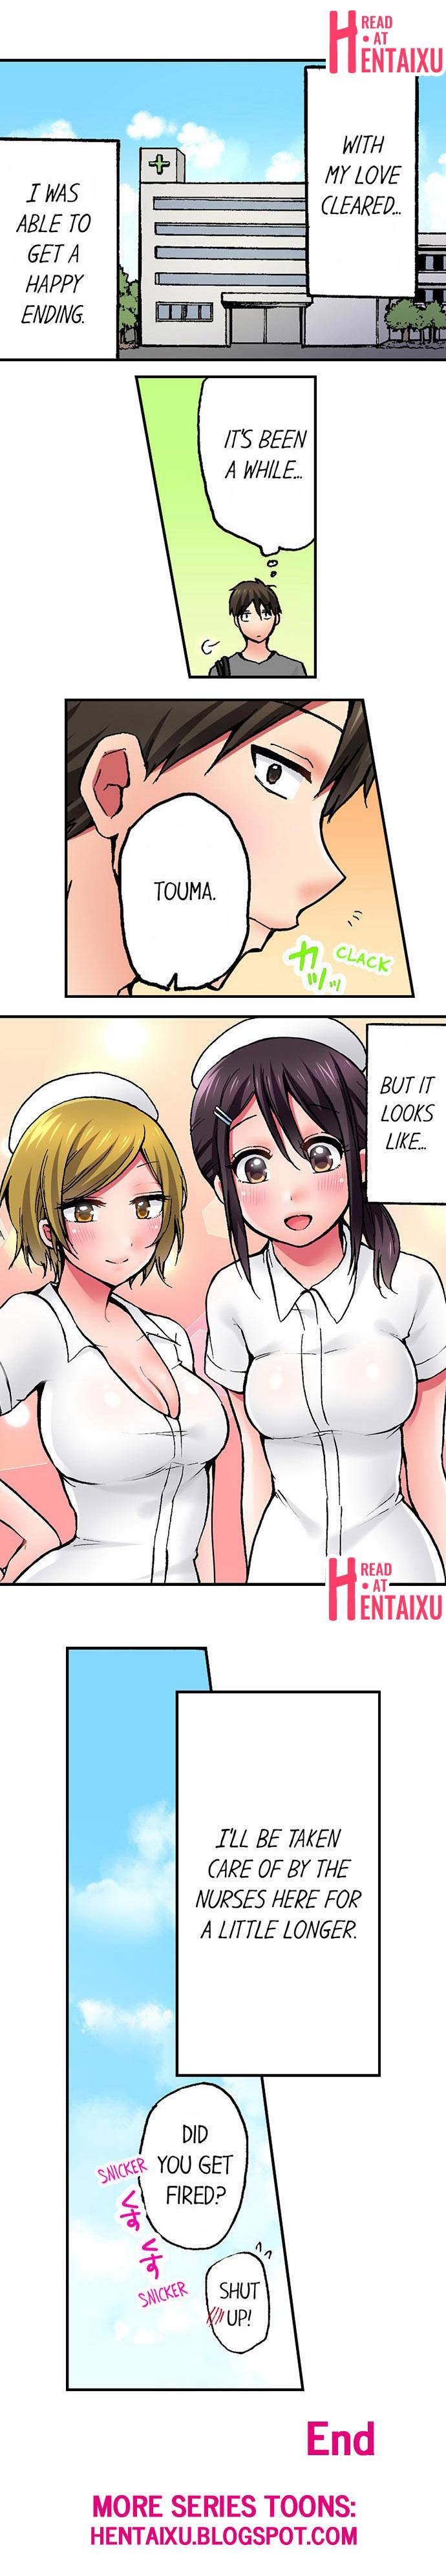 Climax Pranking the Working Nurse Ch.18/18 Seduction - Page 201